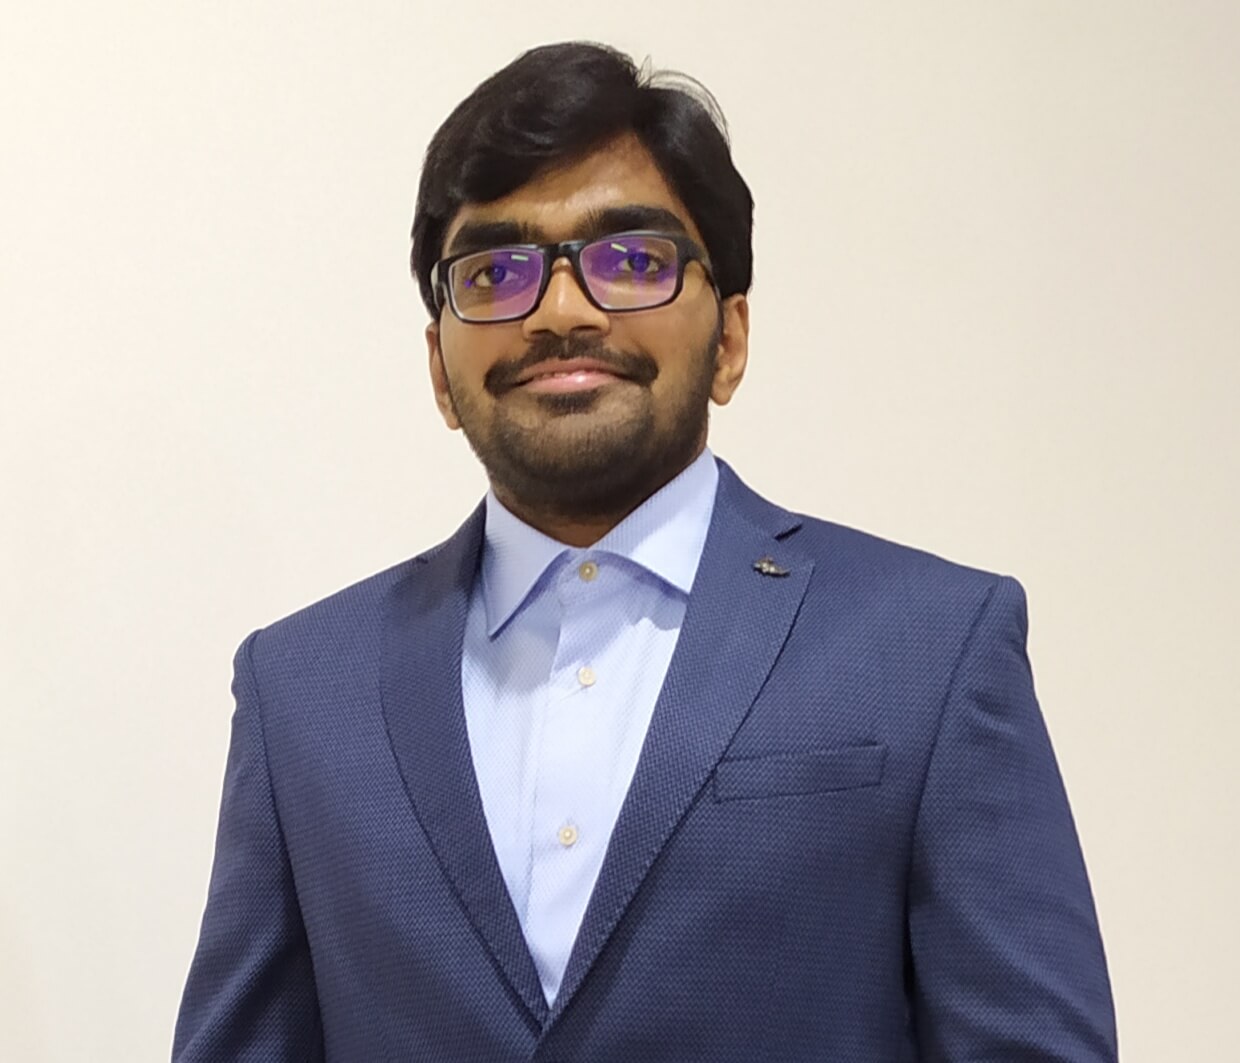 A portrait of Sai, in a smart navy suit smiling at the camera on a cream background.